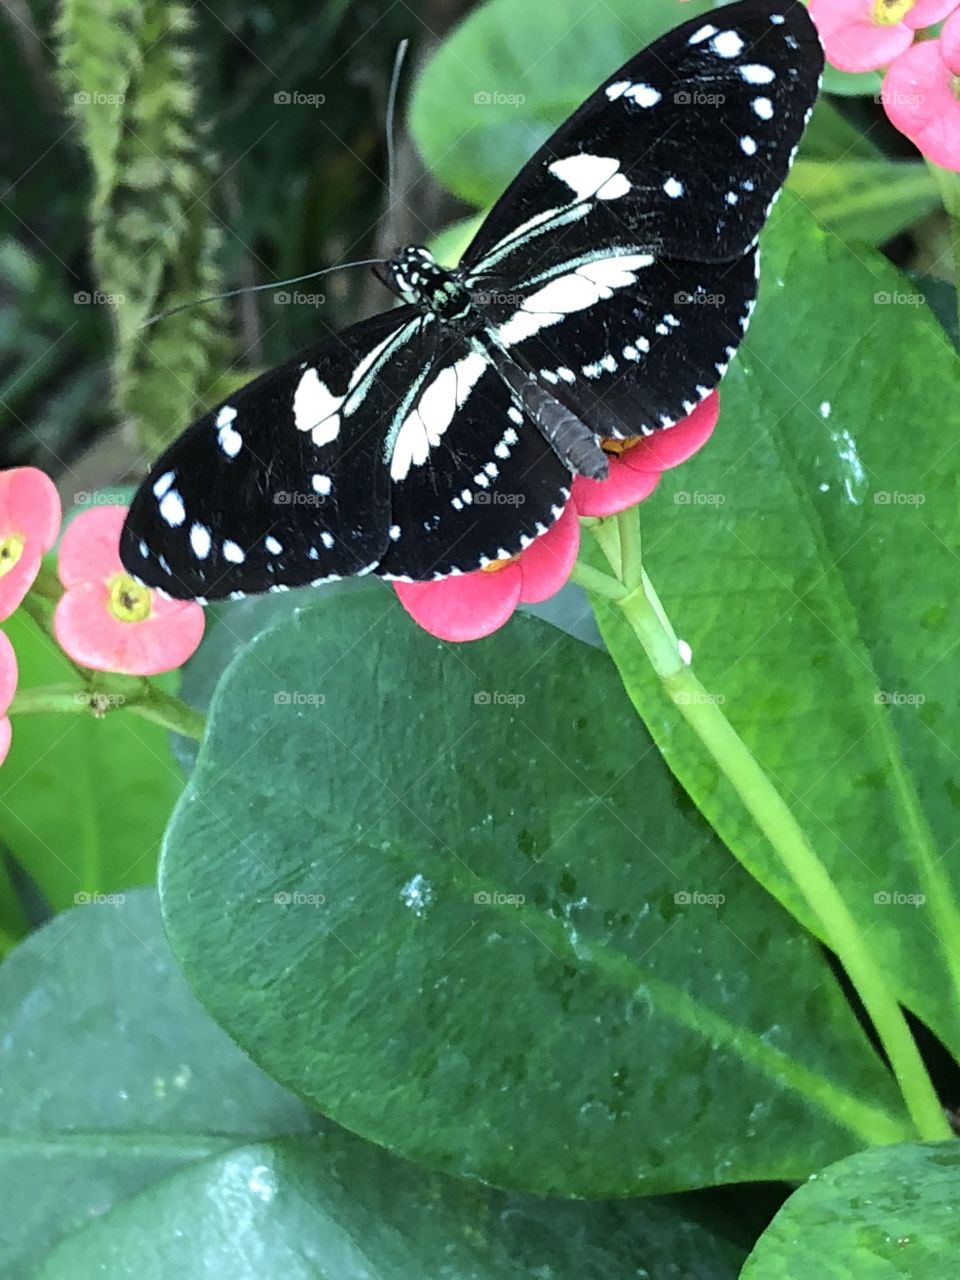 Wish I could remember the type of butterfly this was, but here they are just hanging out on a flower in the Key West Butterfly Conservatory!